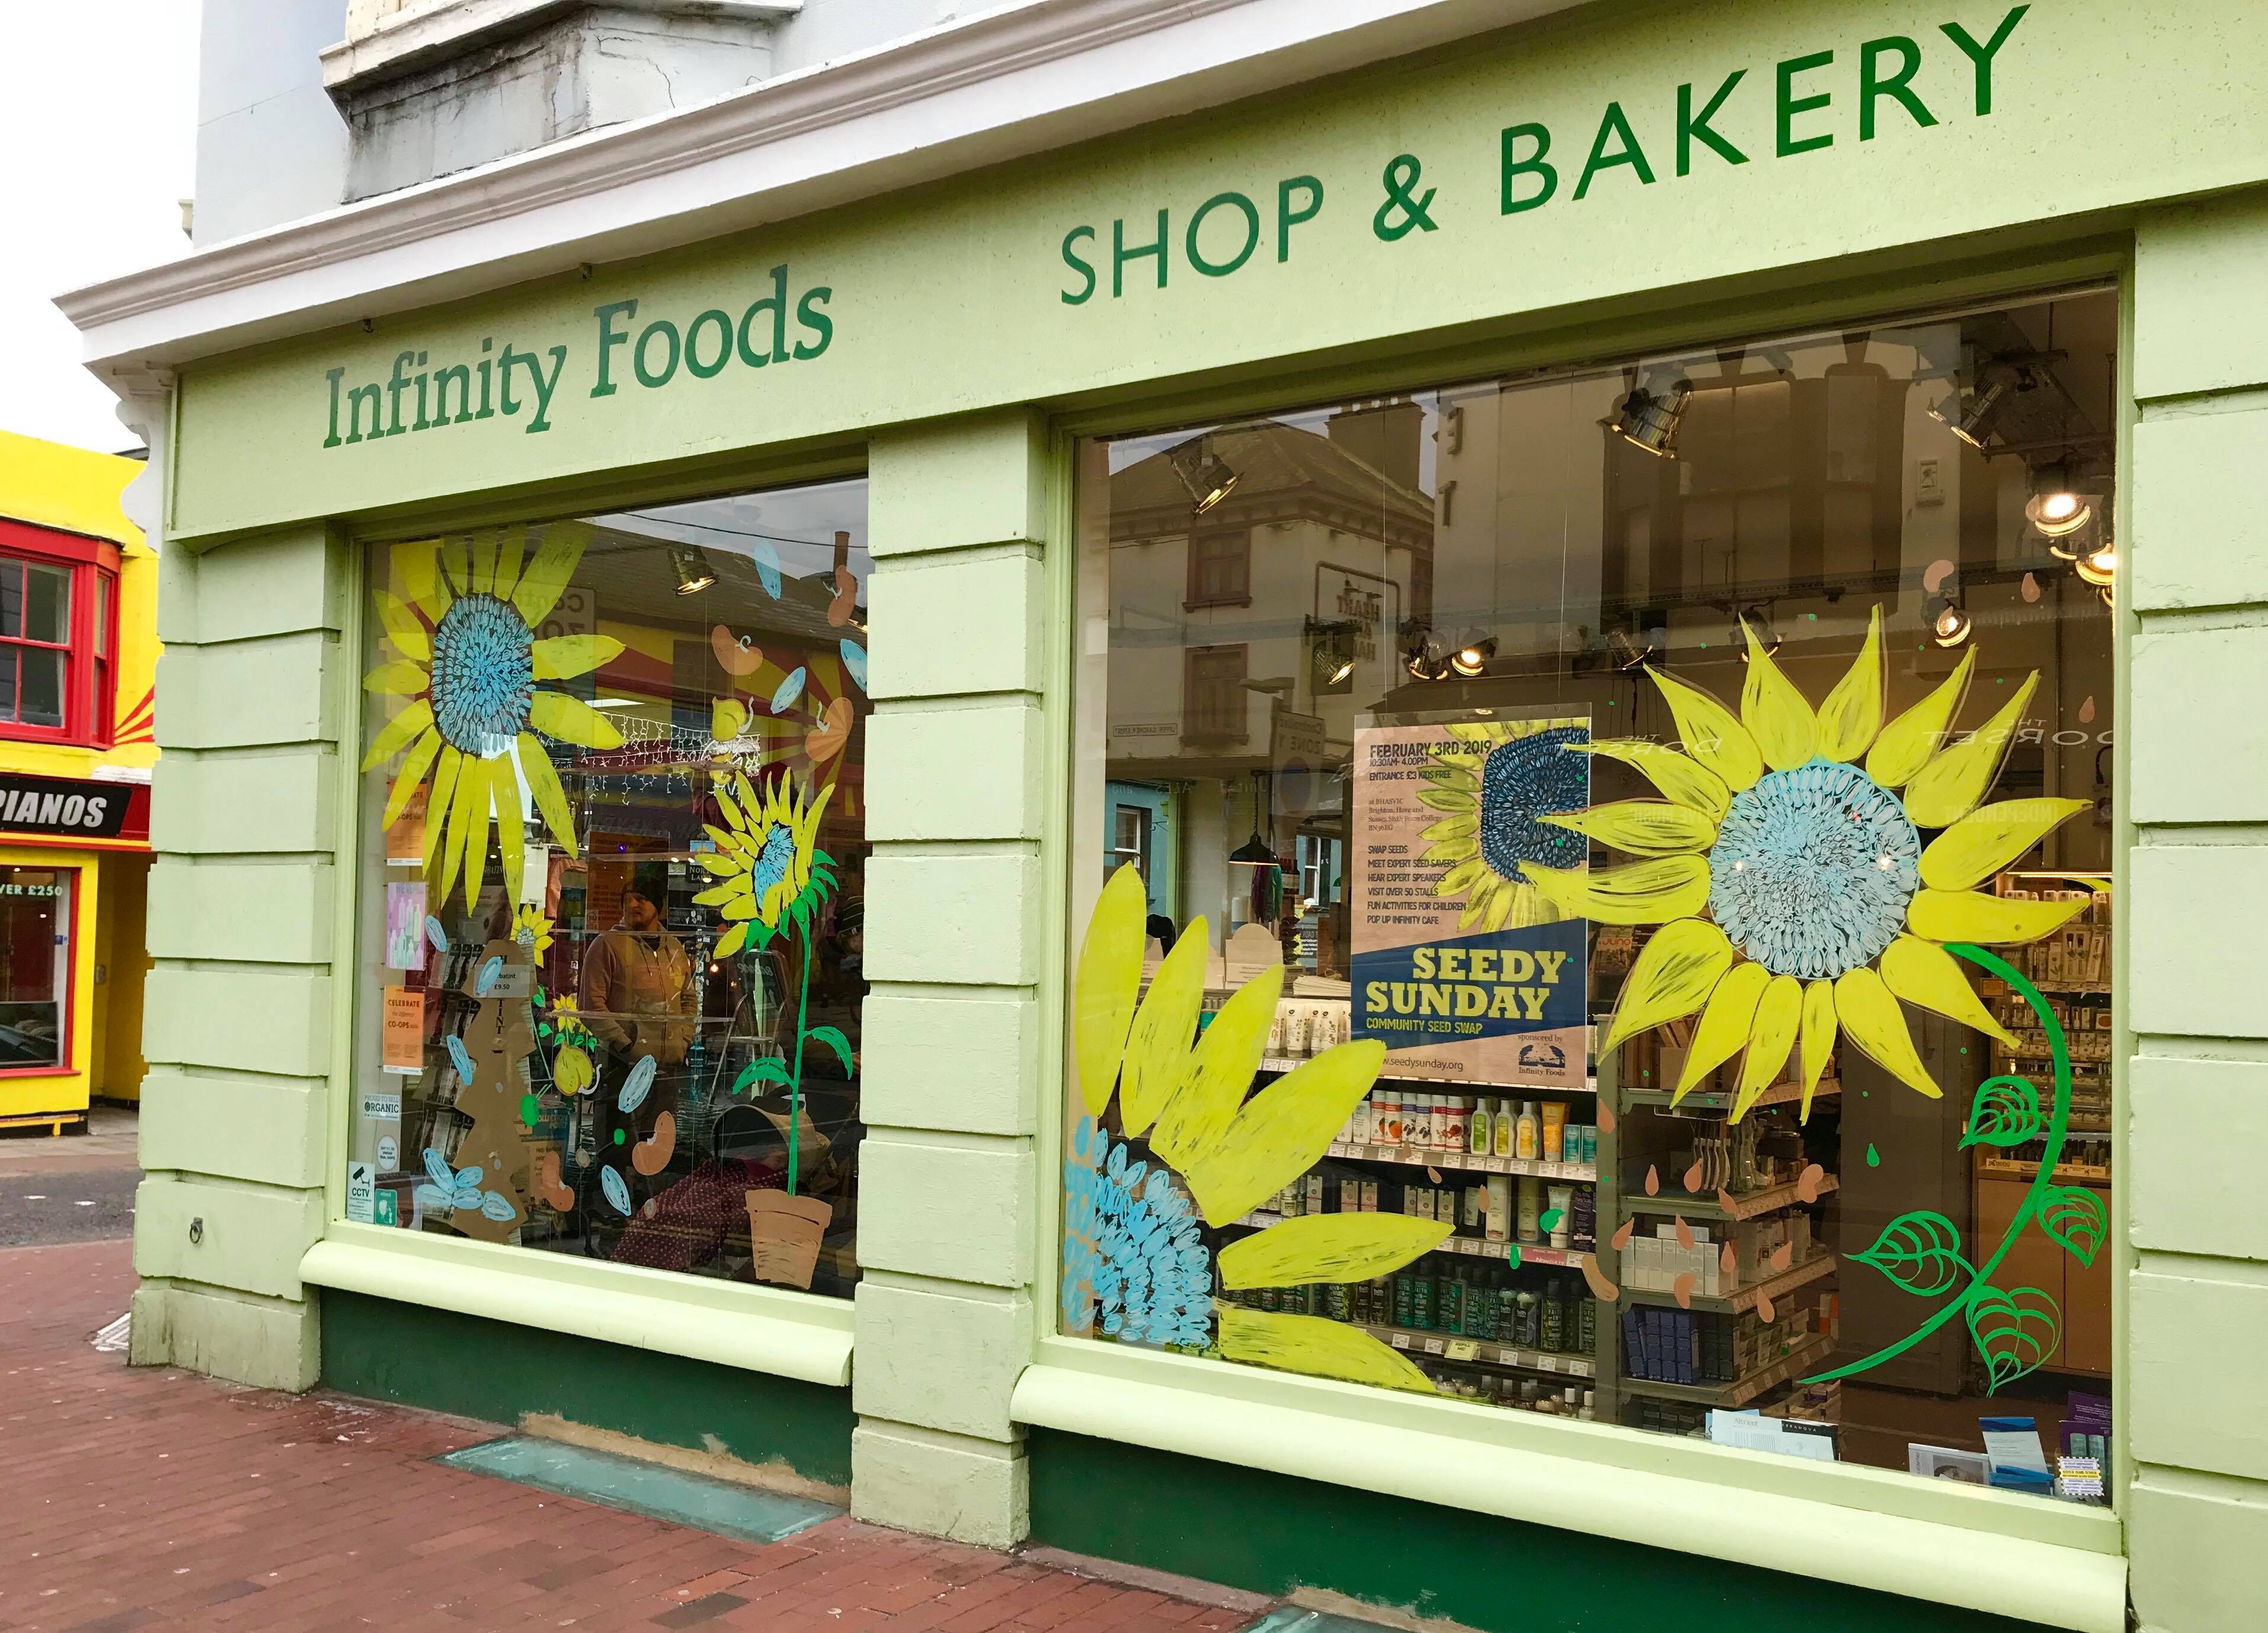 shop front view of Infinity Foods Shop & Bakery